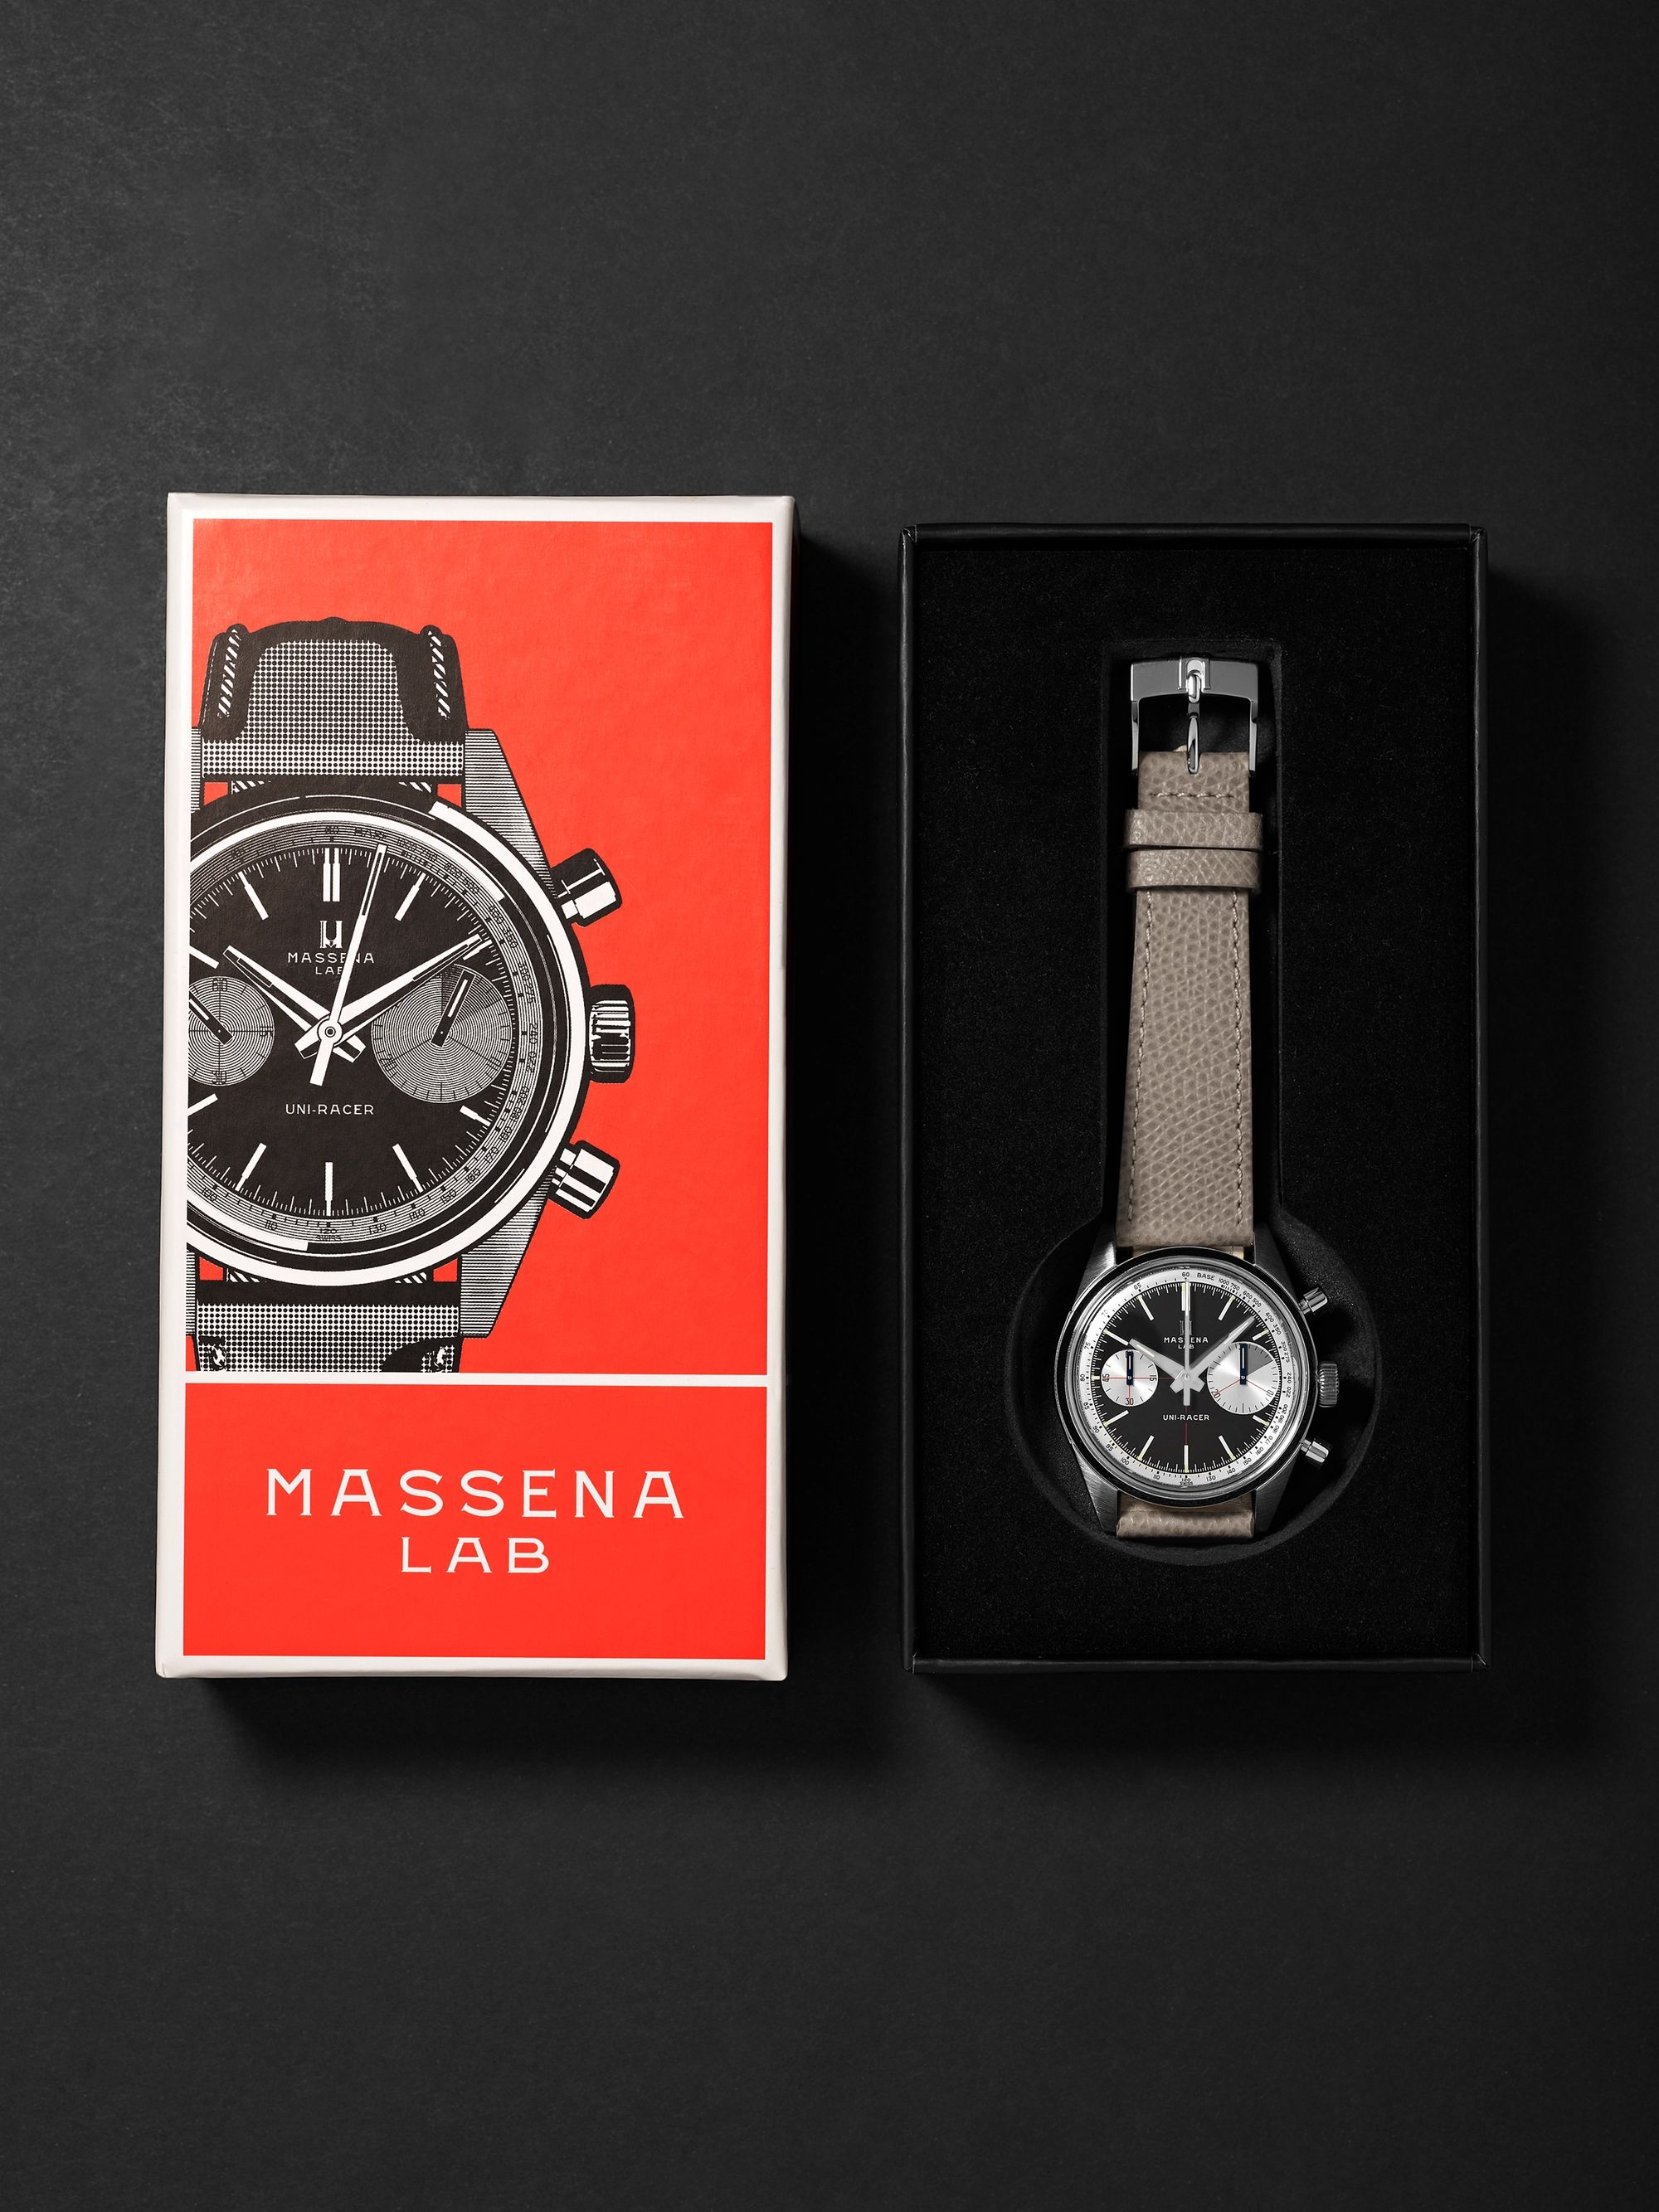 MASSENA LAB Uni-Racer Limited Edition Hand-Wound Chronograph 39mm Stainless Steel and Cross-Grain Leather Watch, Ref. No. UR-002